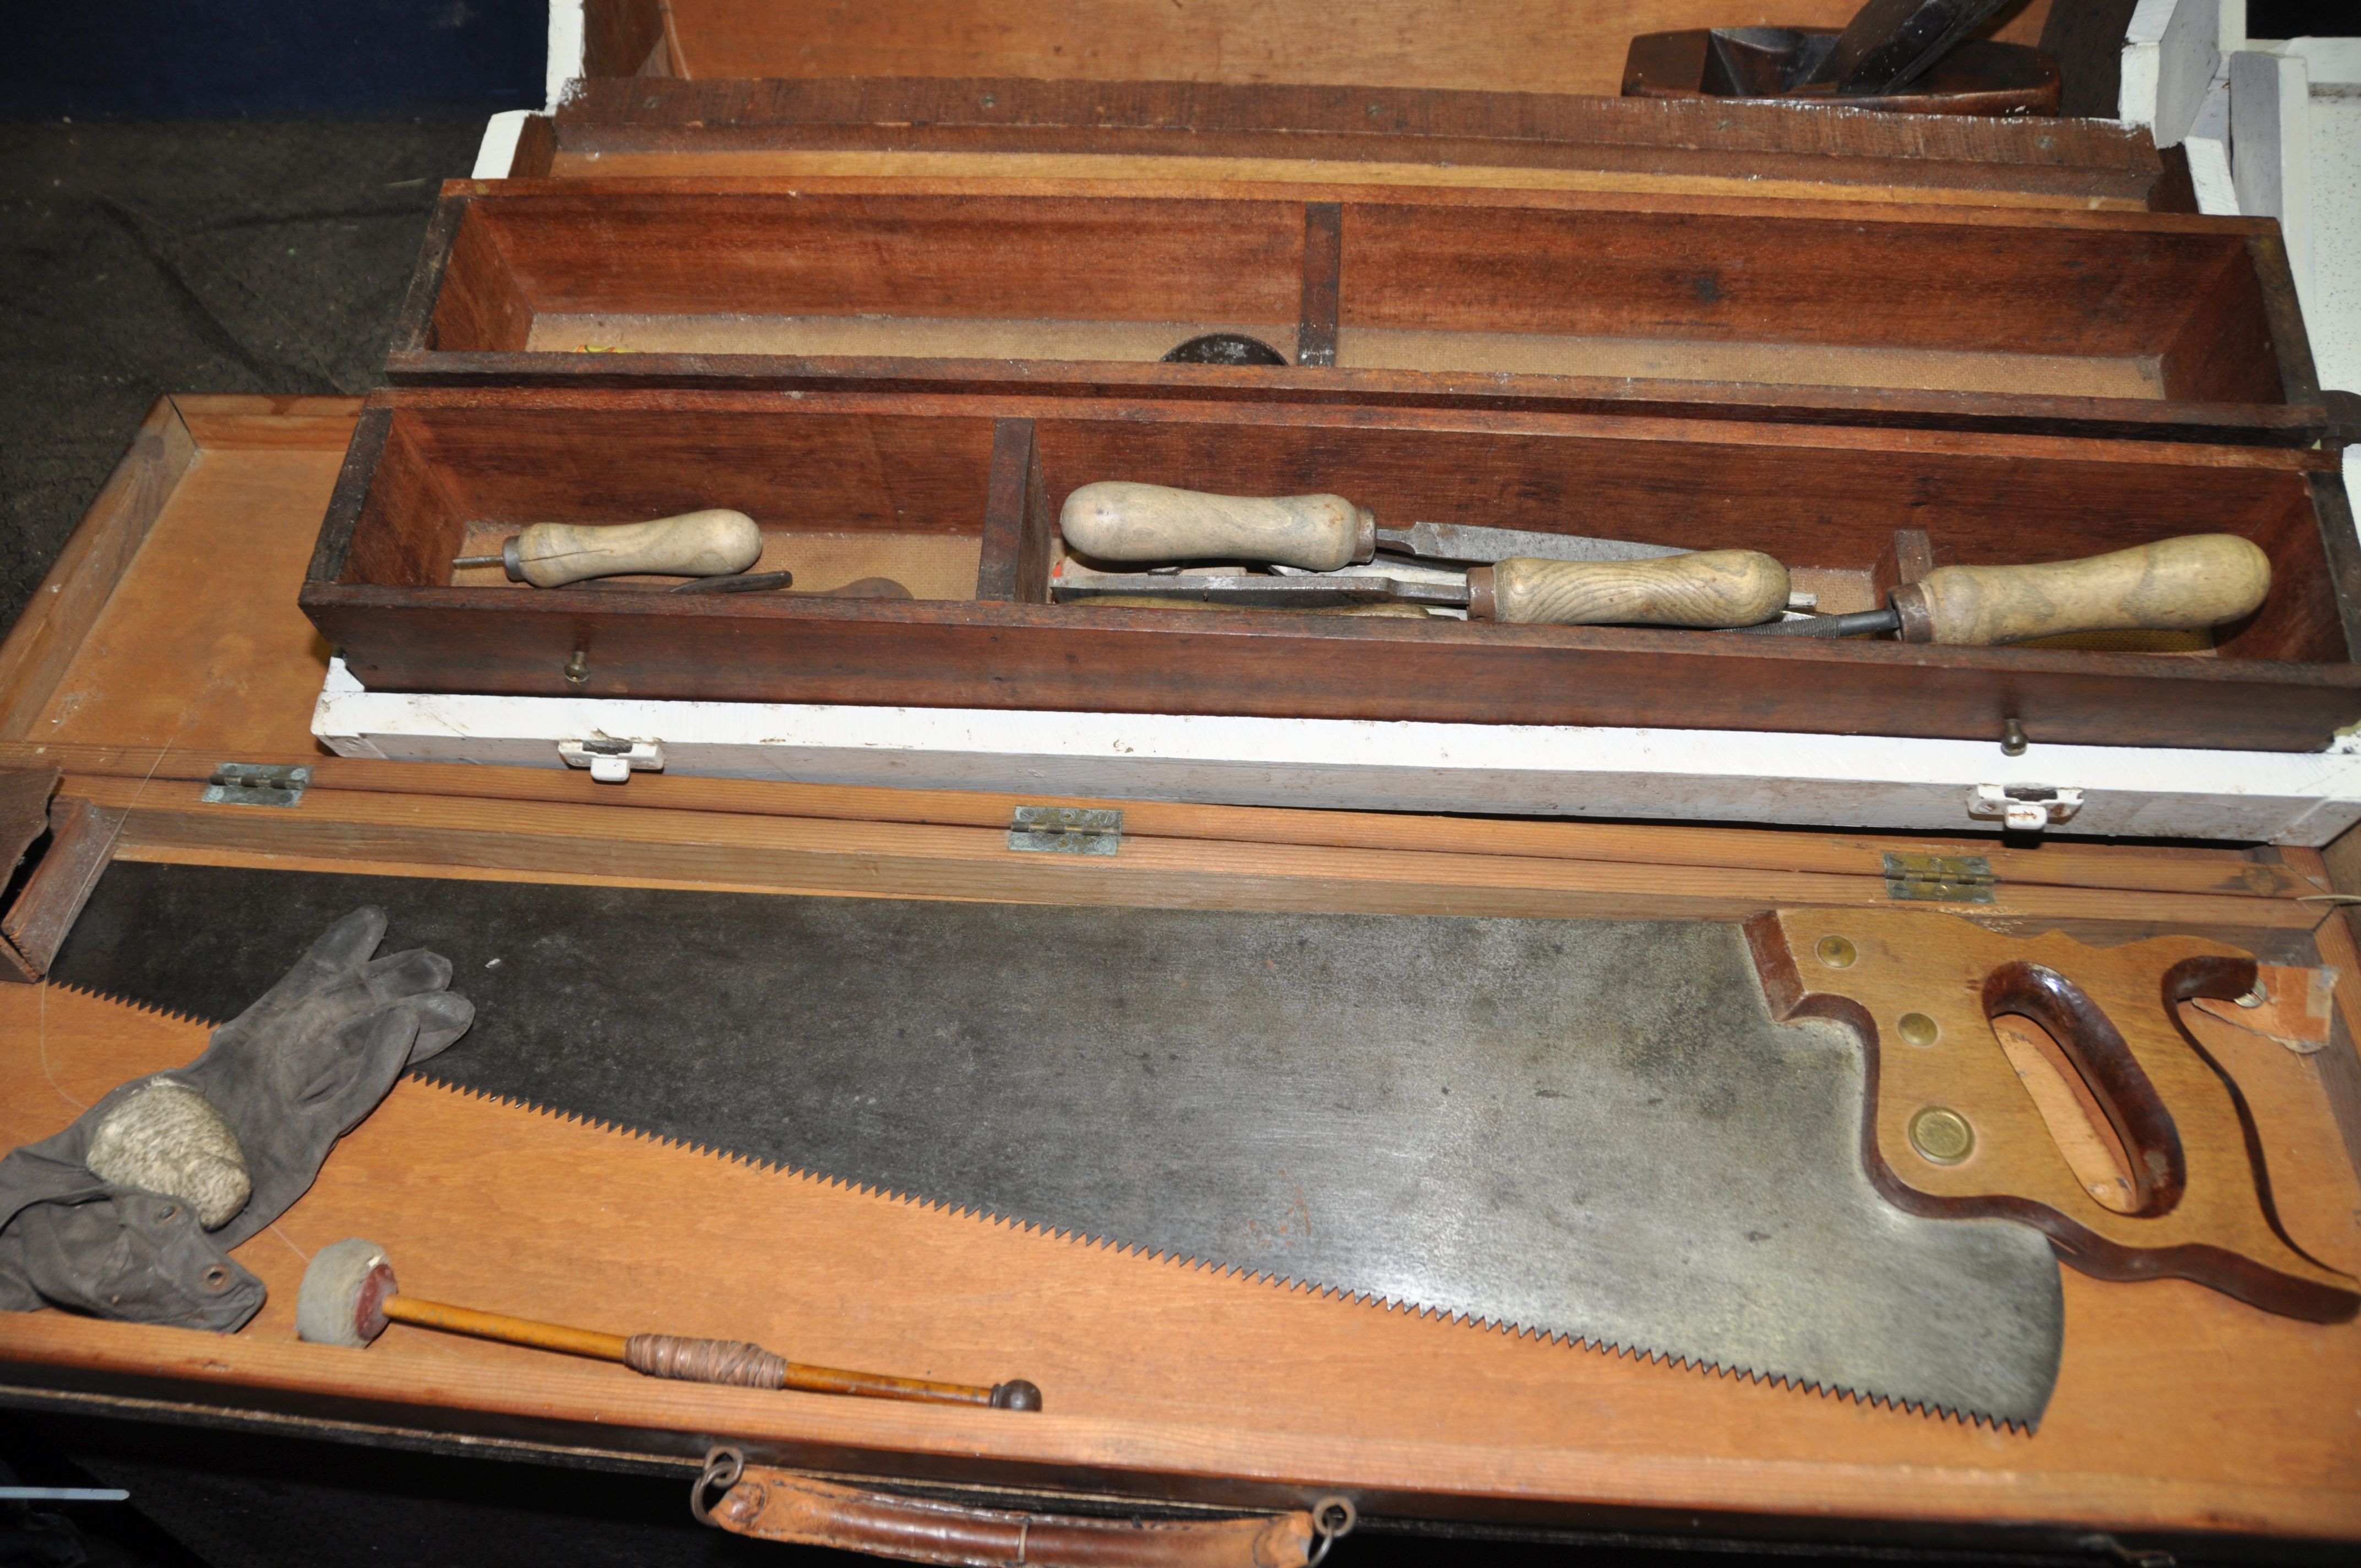 TWO WOODEN CARPENTERS TOOLBOXES CONTAINING TOOLS including a boxed saw, toolmakers clamps, files, - Image 2 of 6